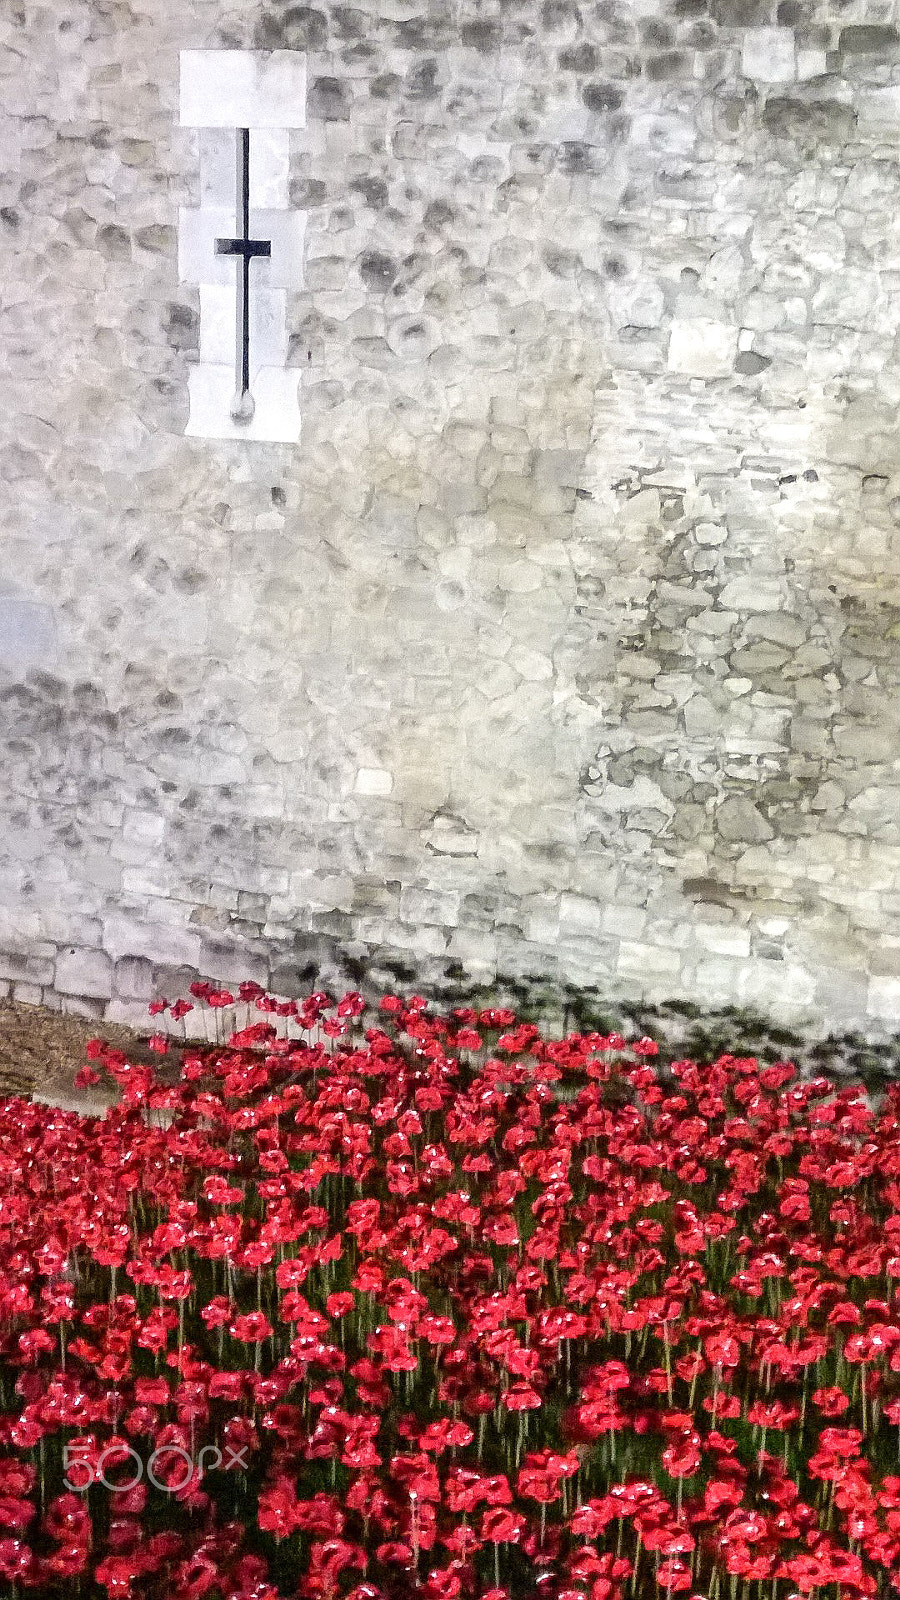 Nokia Lumia 930 sample photo. Poppies in the tower photography